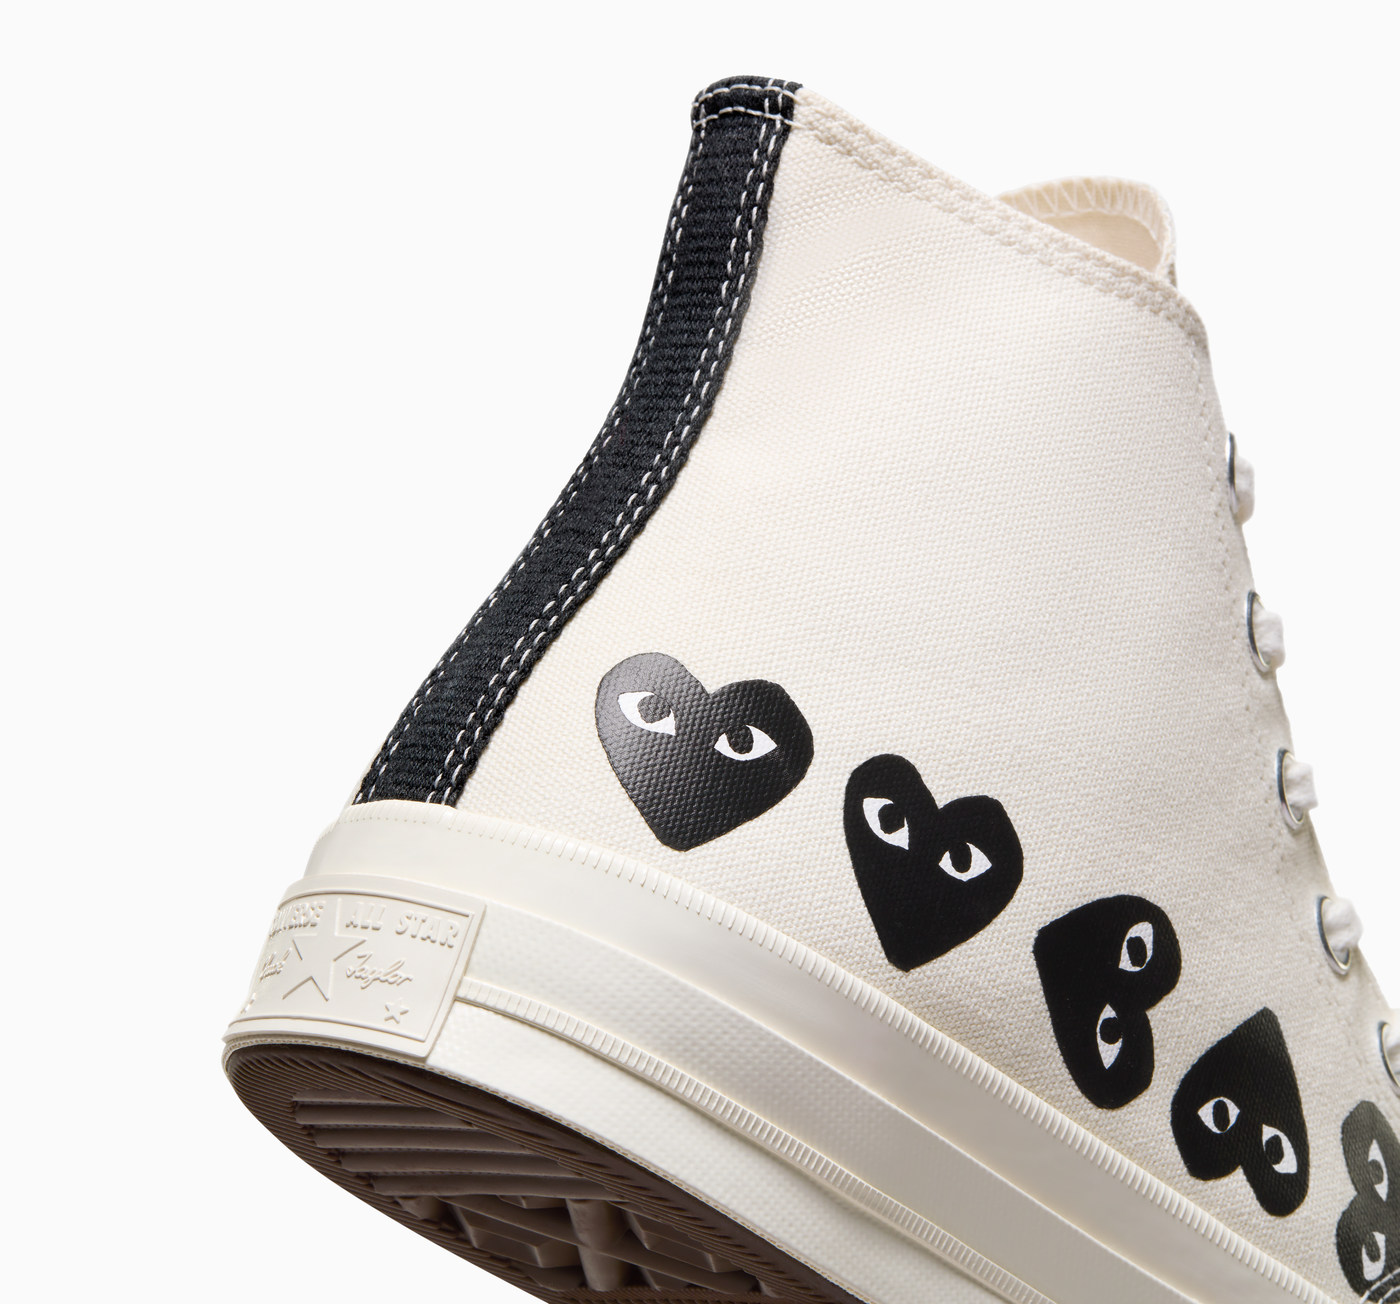 Multi Black Heart Chuck Taylor All Star '70 High Sneakers (White)